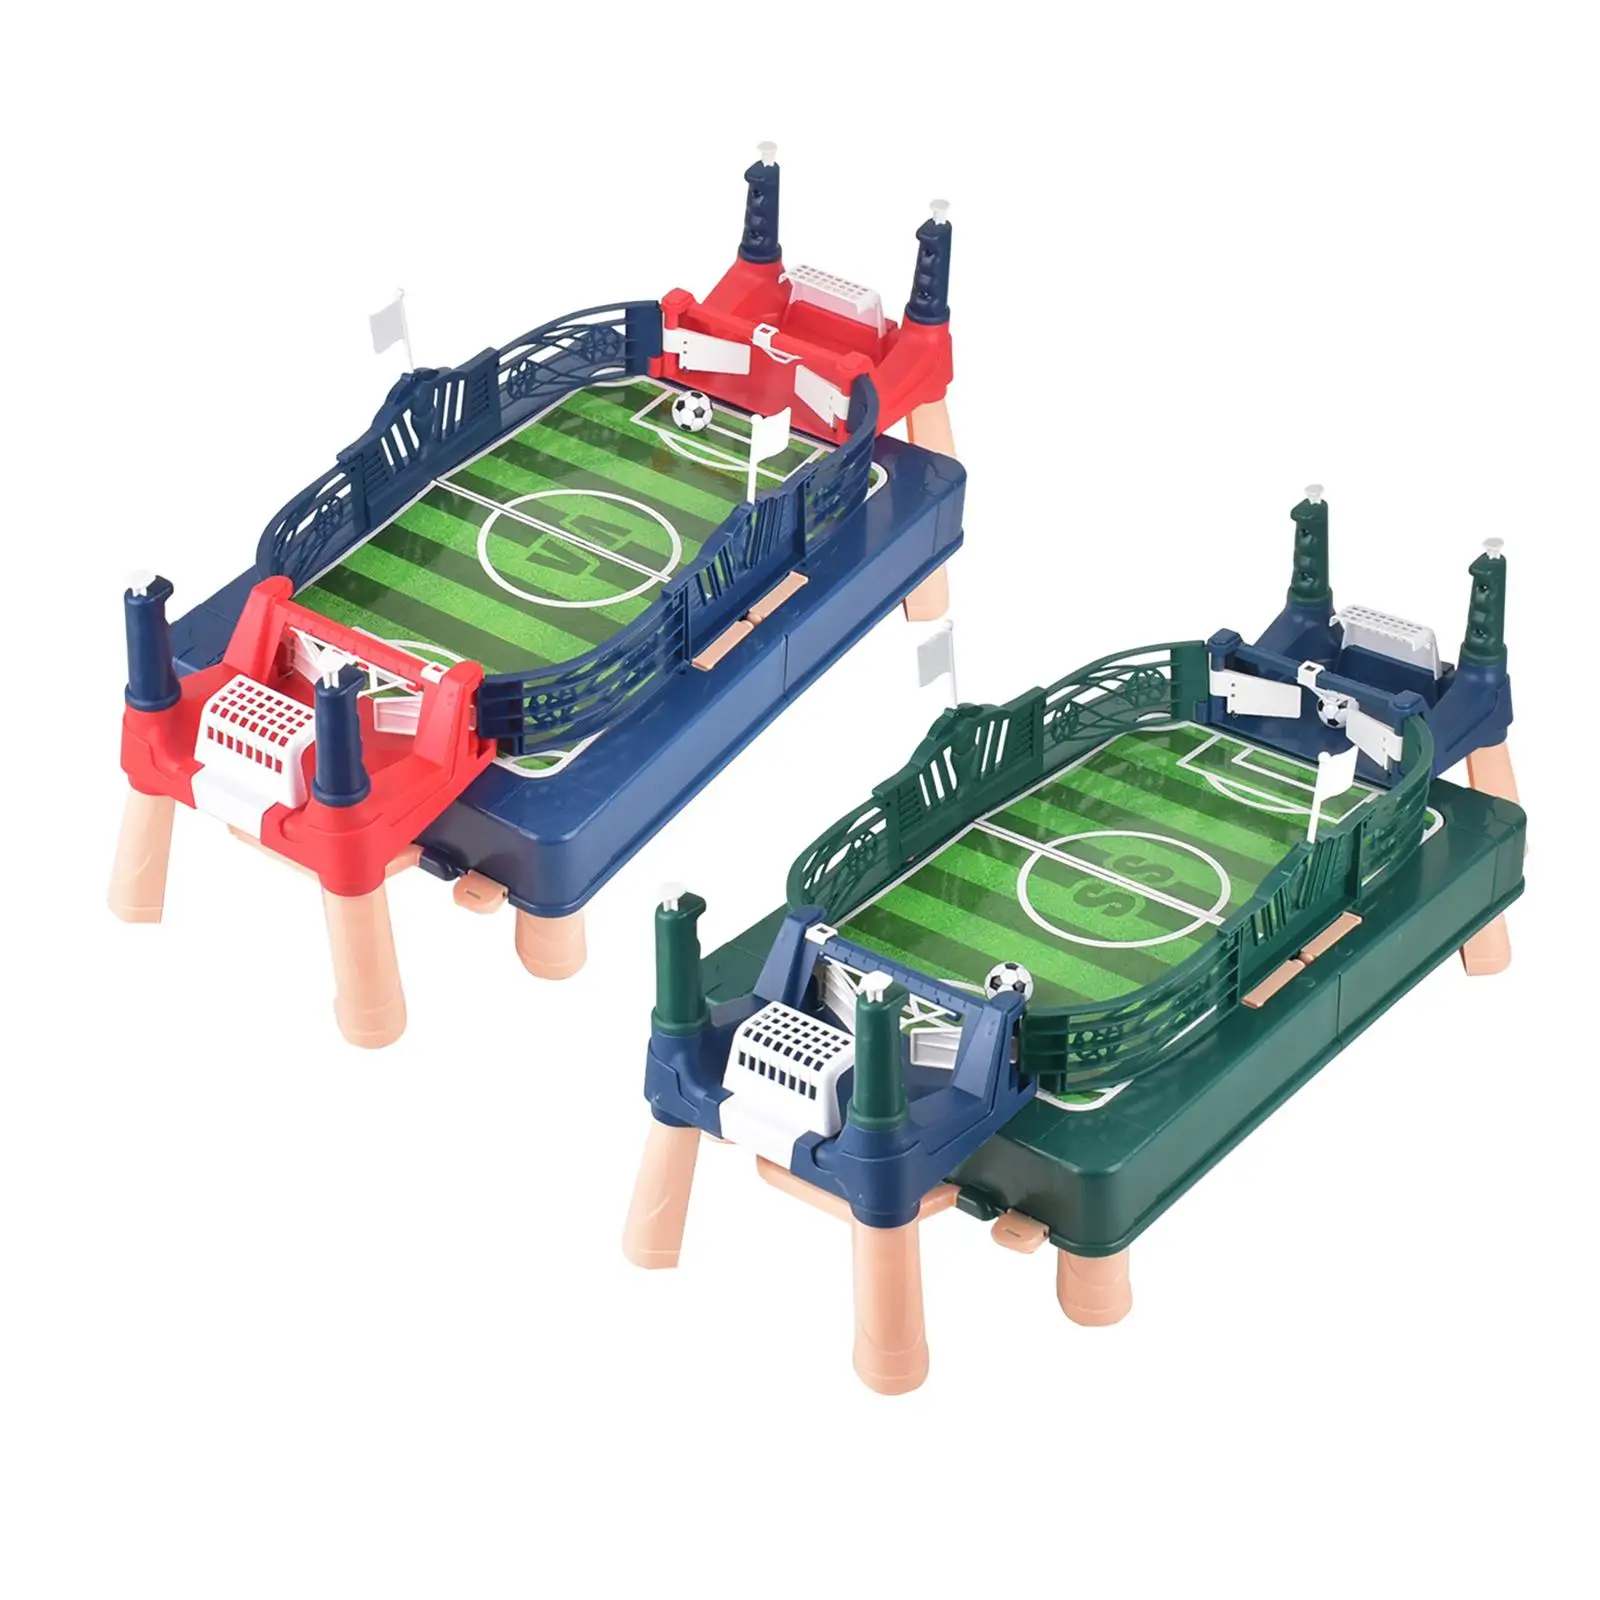 

Portable Tabletop Football Game Intellectual Developmental Family Game Competitive Soccer Games for Kids Children Birthday Gifts